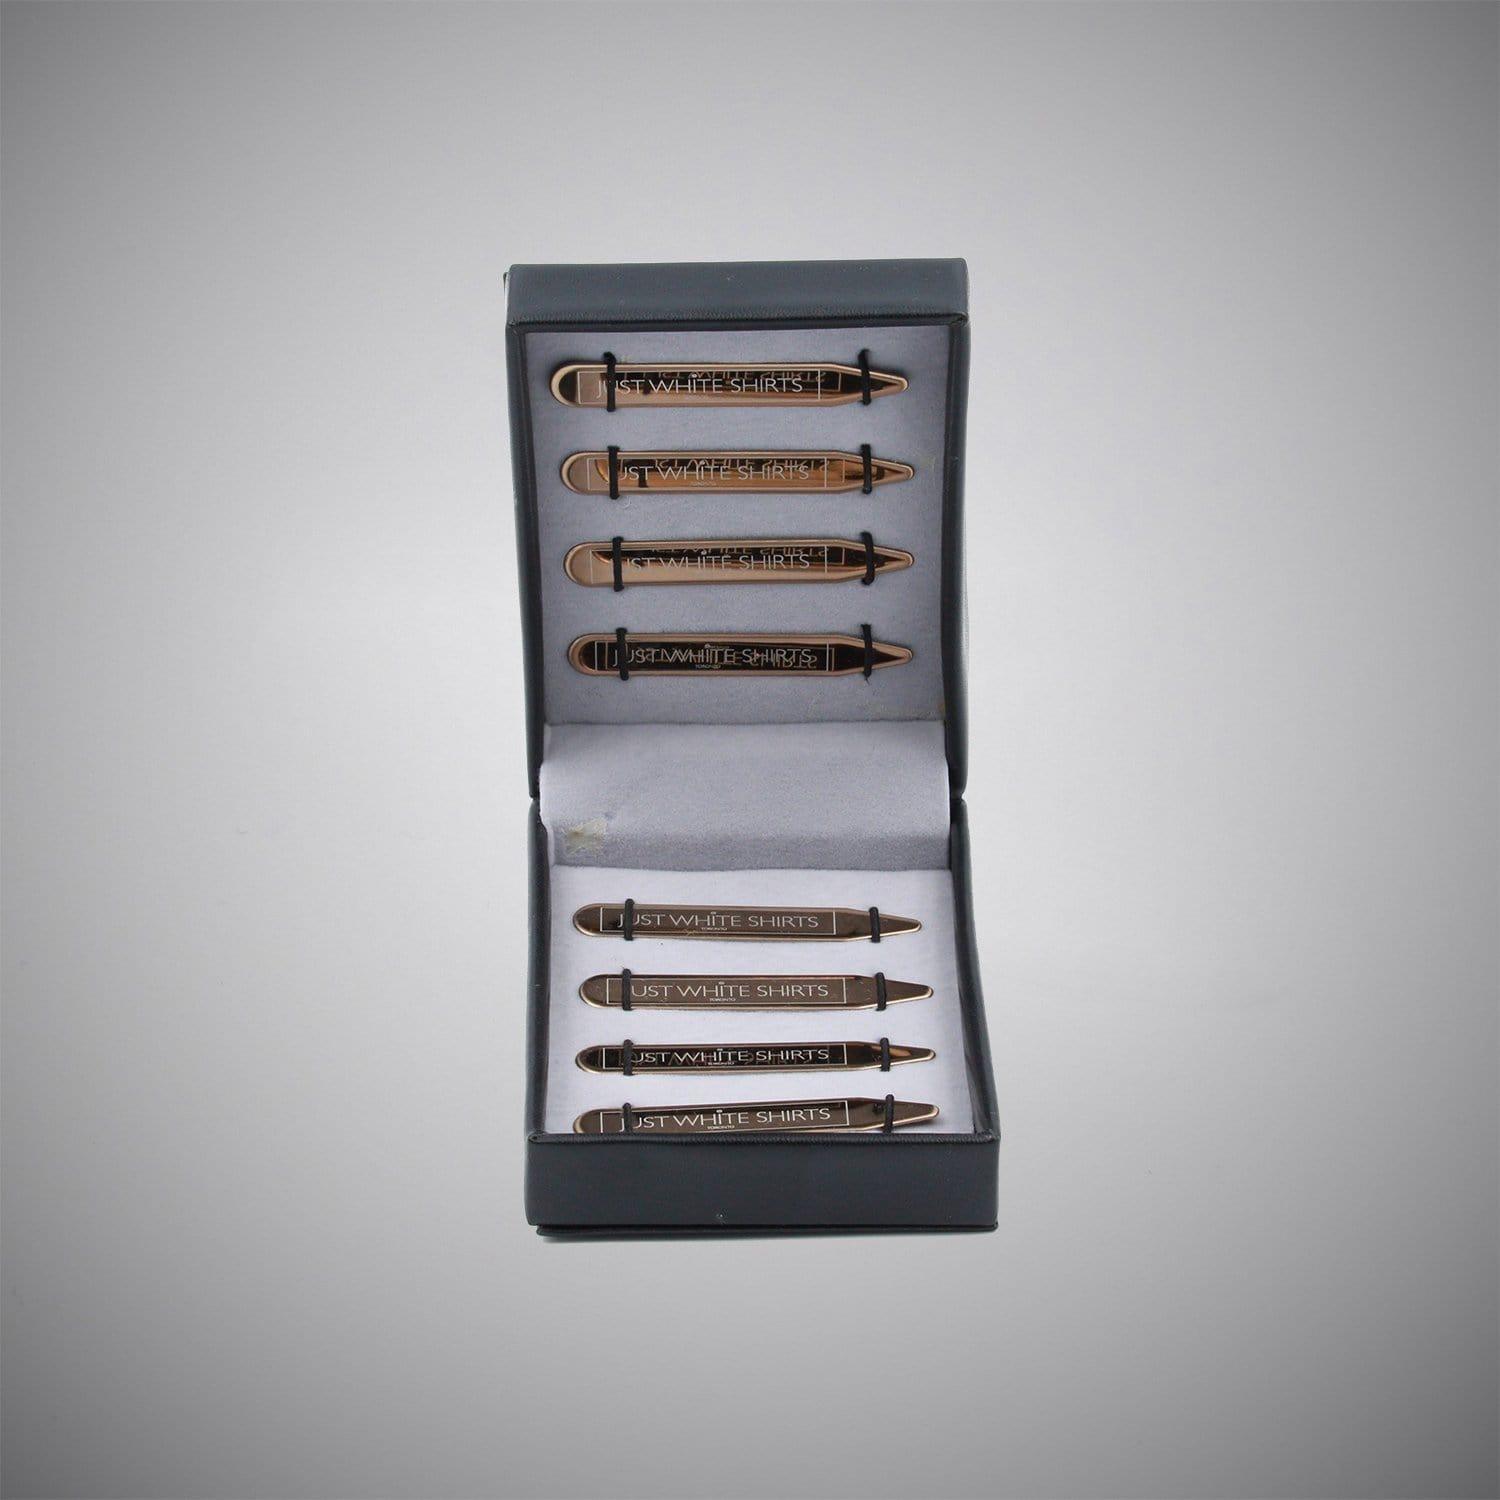 Rose Gold Chrome Finish Stainless Steel 8 Piece Collar Stay Box Set - Just White Shirts